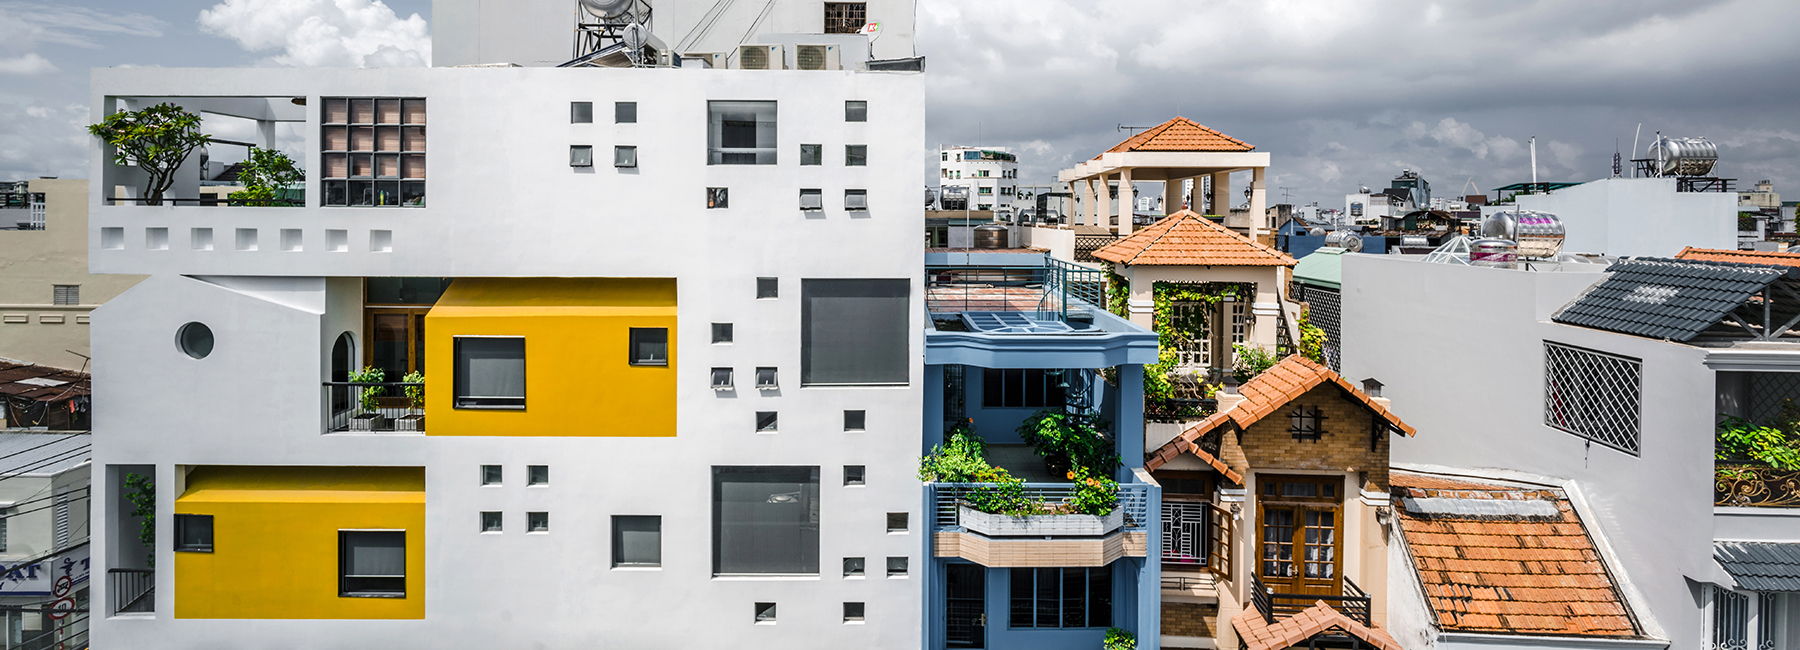 23o5 studio's HVB complex in vietnam comprises tree-filled voids and bright yellow volumes